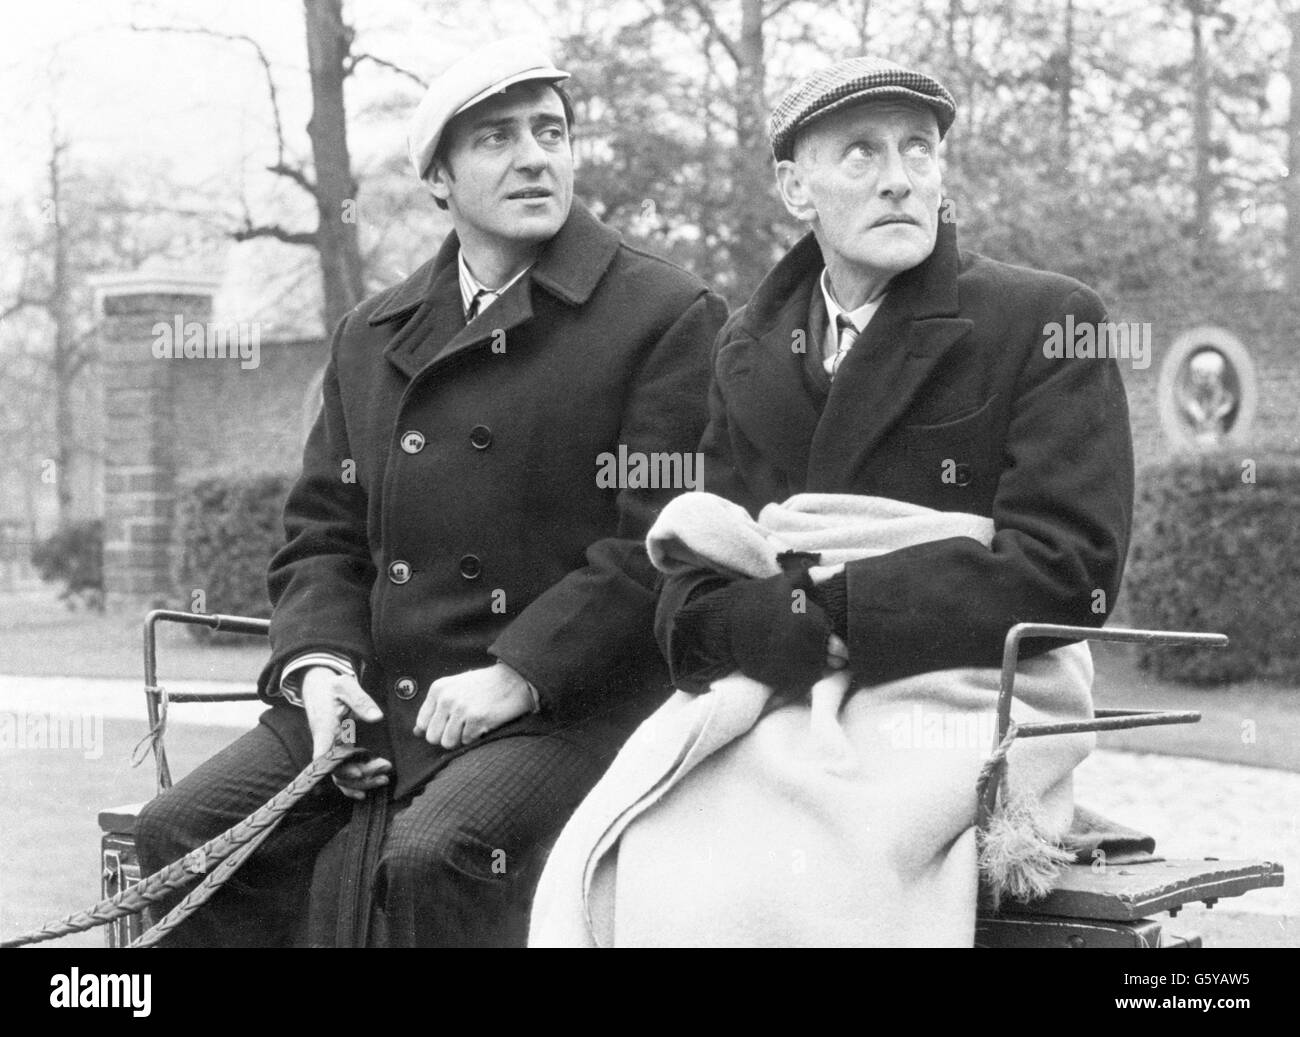 Back in business for viewers are BBC television's rag-and-bone men Steptoe and Son - Harry H Corbett (left) as Harold and Wilfrid Brambell as Albert - pictured on their 'totting' cart, drawn by their horse Hercules. Stock Photo